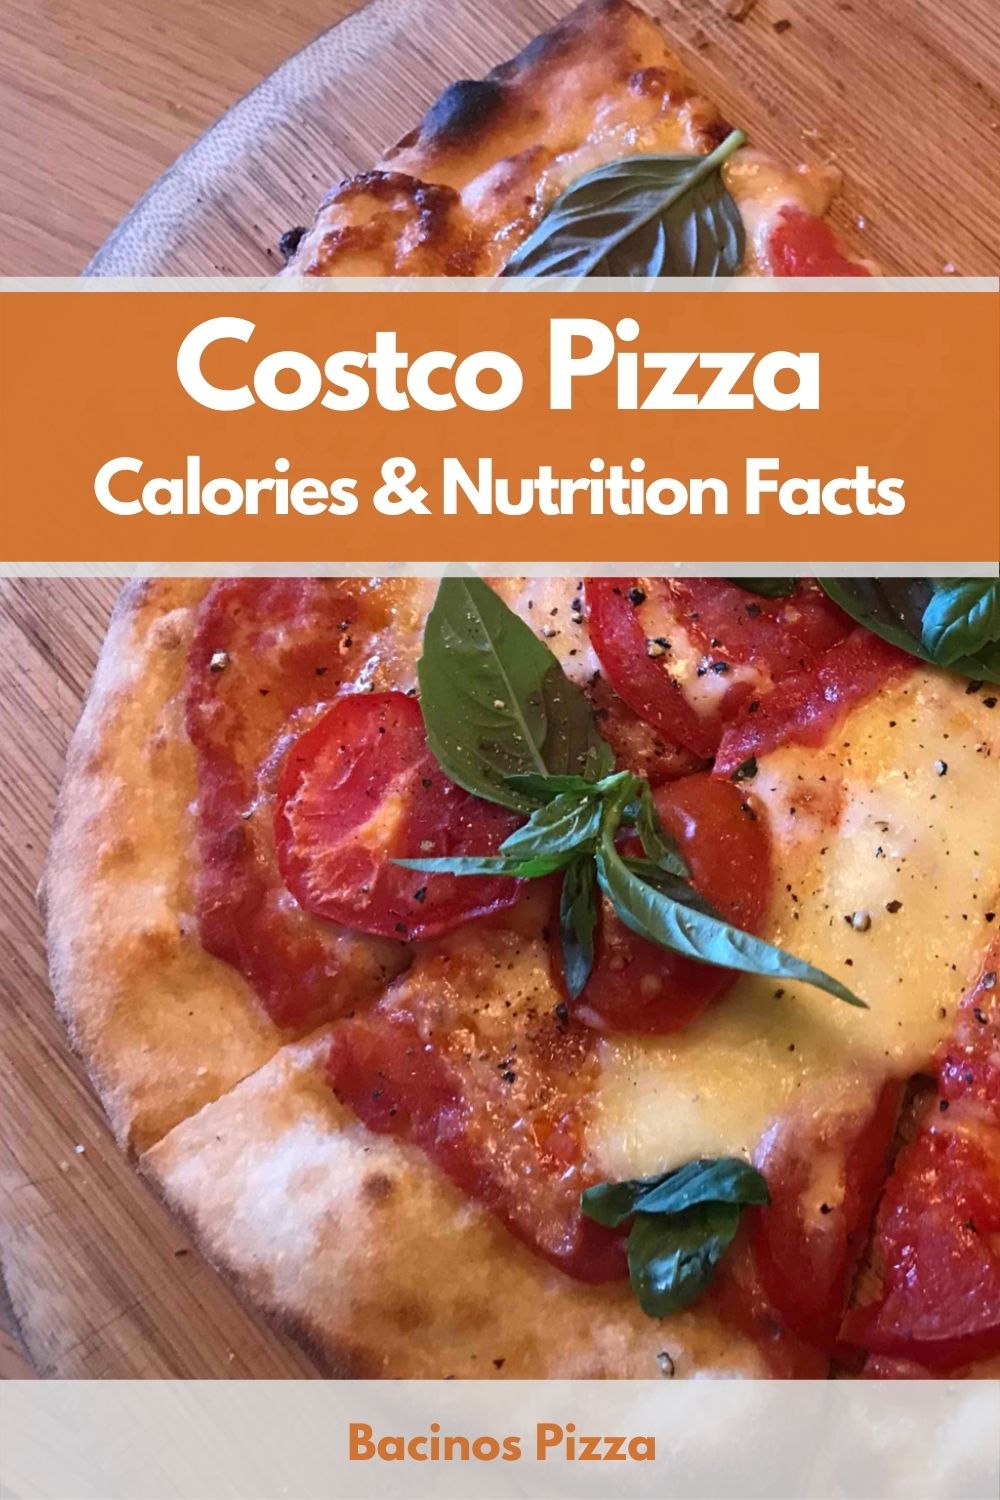 Costco Pizza Calories & Nutrition Facts pin